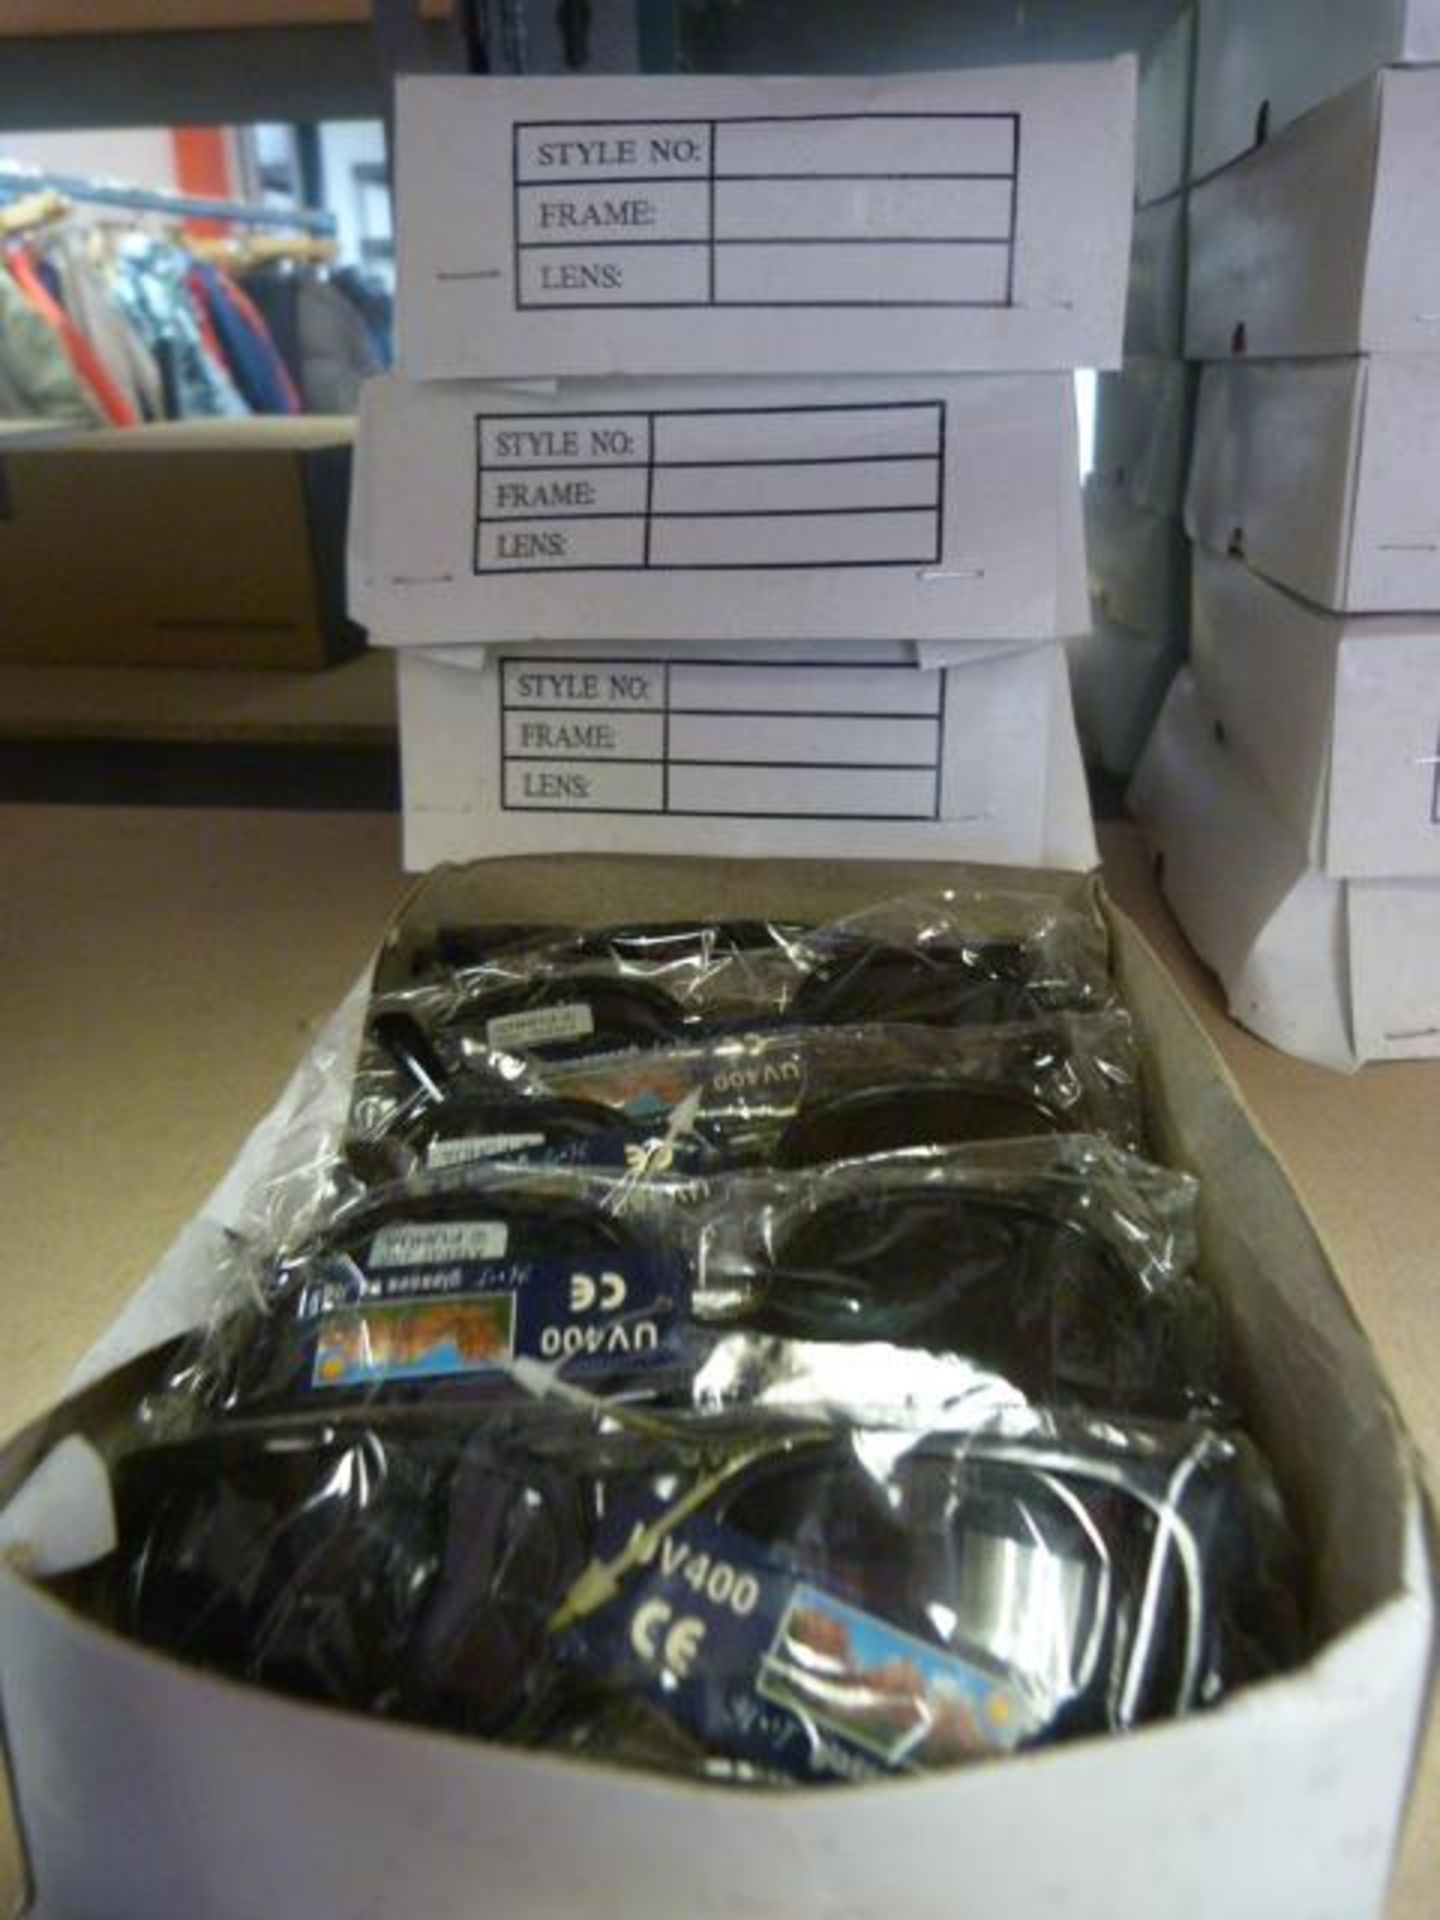 Box of 12 UV400 Sunglasses from Jack Wolfskin shop RRP 19.